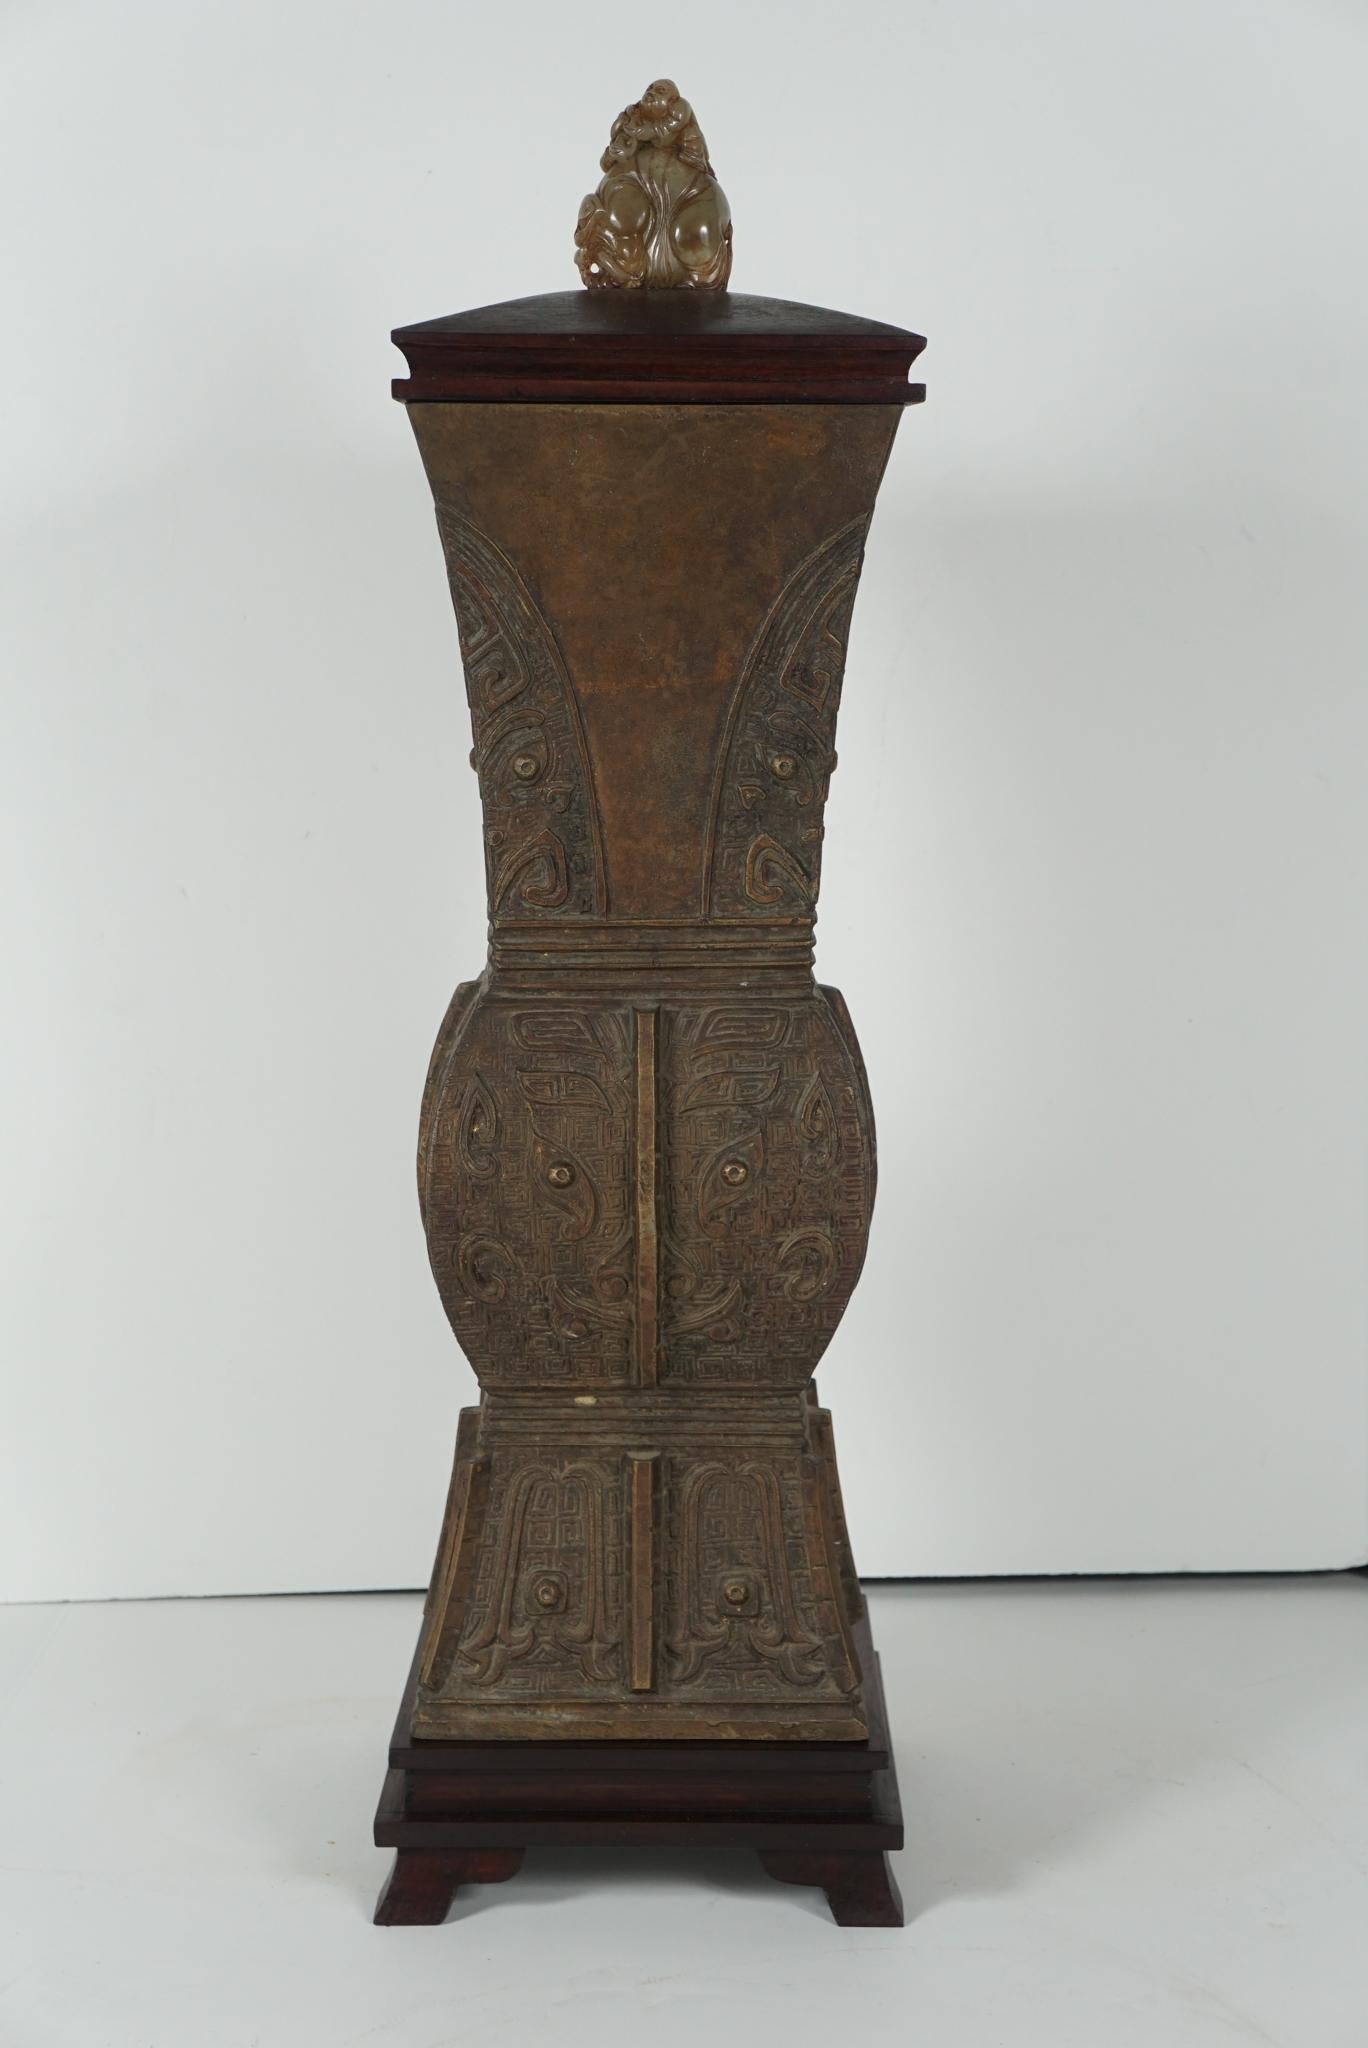 This very finely cast bronze urn in an archaistic form was made in the very late 19th century approximately 1895-1900. Done with an apocryphal feeling to honor the ancient past, the vase is beautifully rendered in low relief in bronze covering